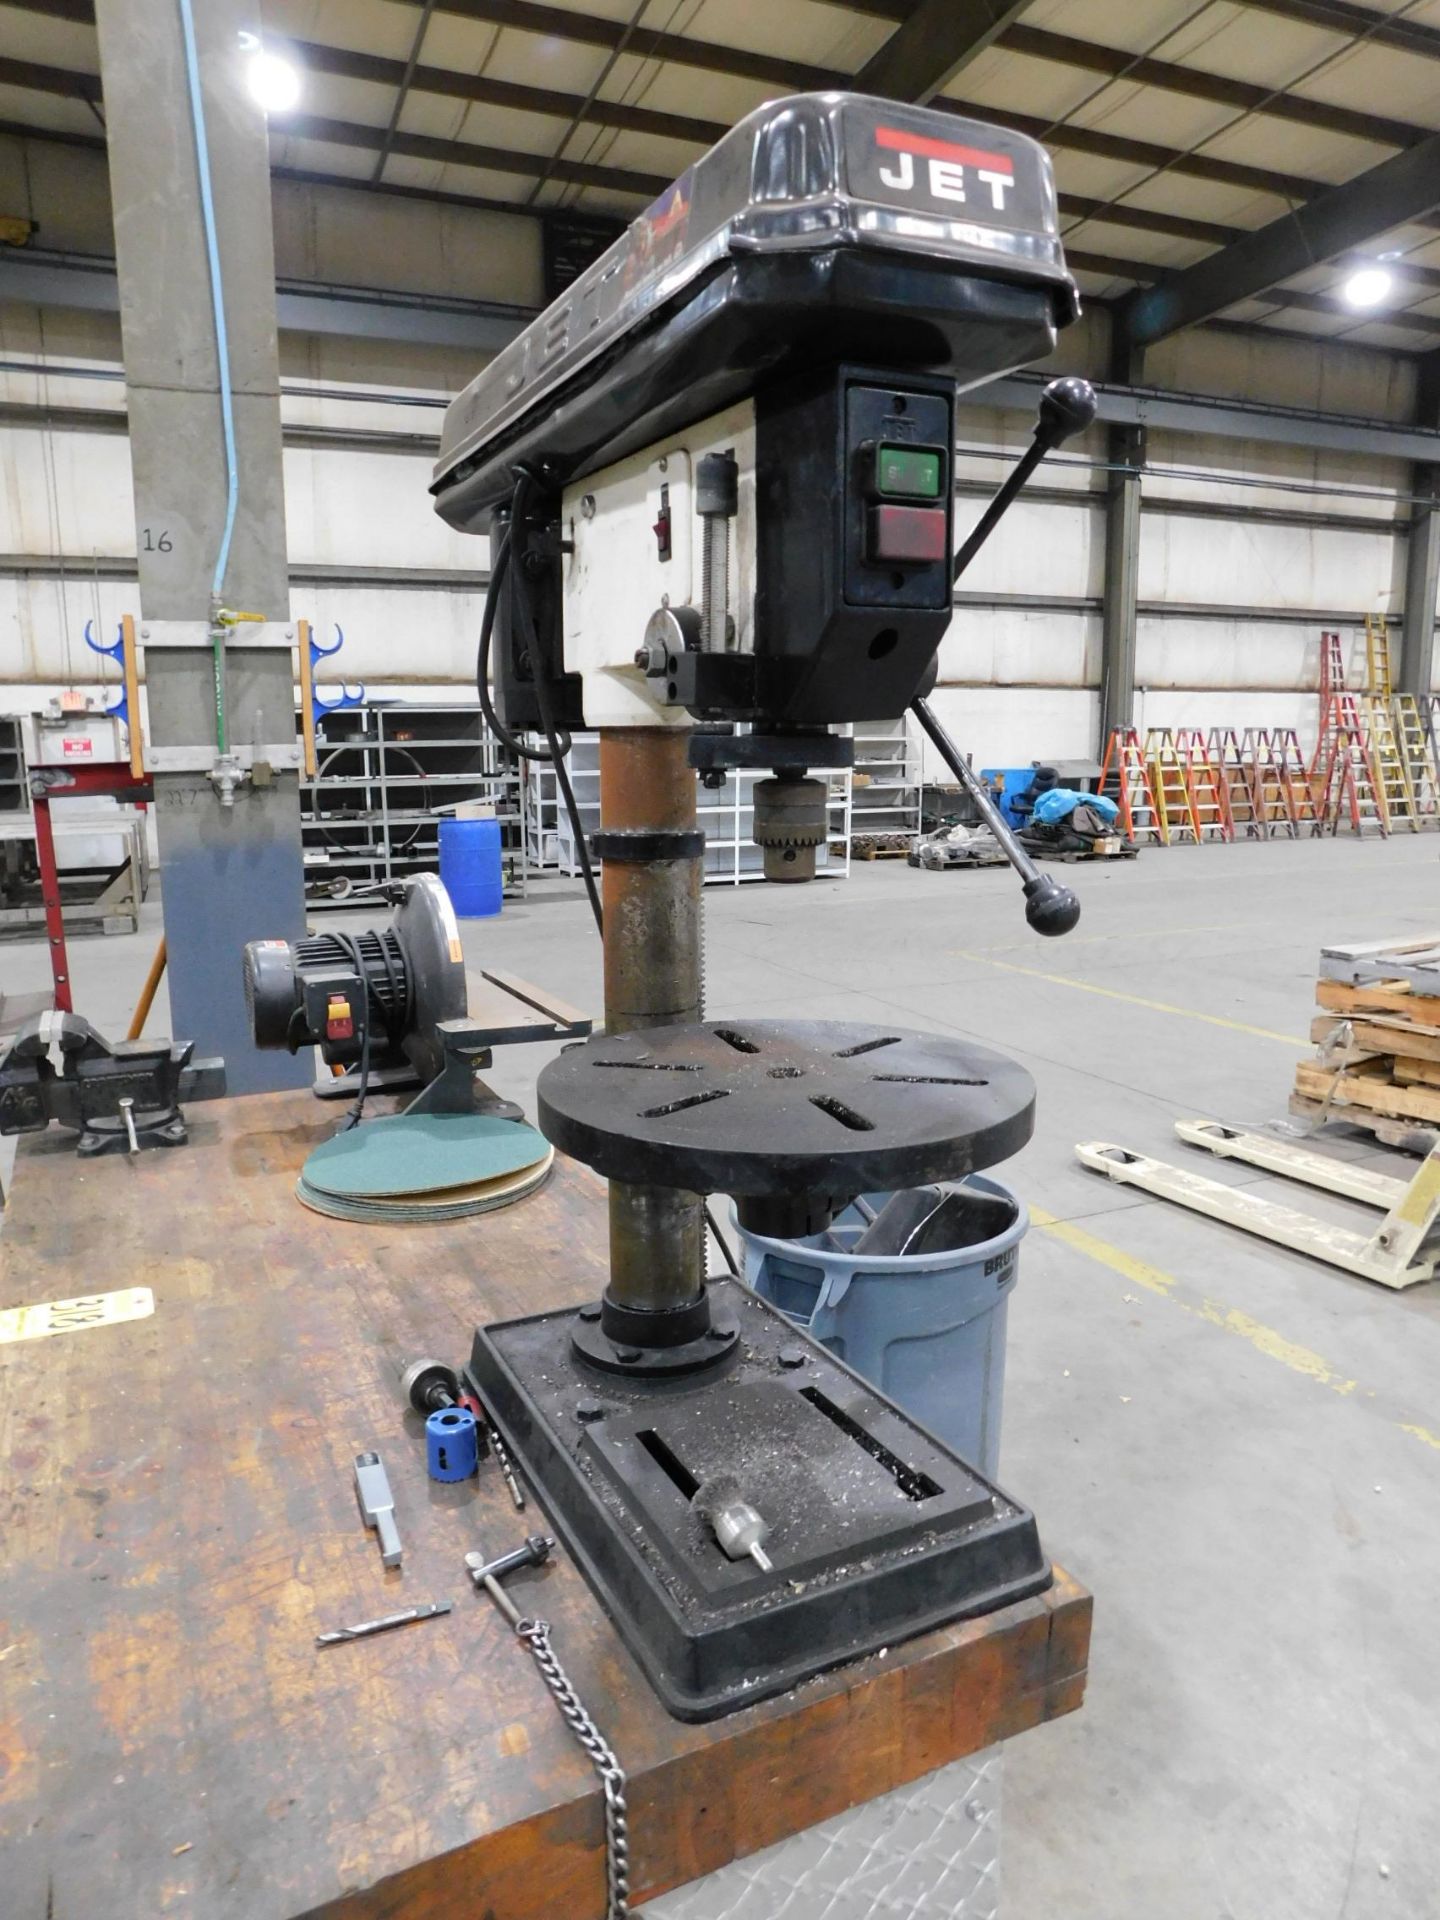 Toolmaker's Bench on Casters, with Jet 14" Bench Model Drill Press, Dayton 12" Disc Sander, and - Image 3 of 5